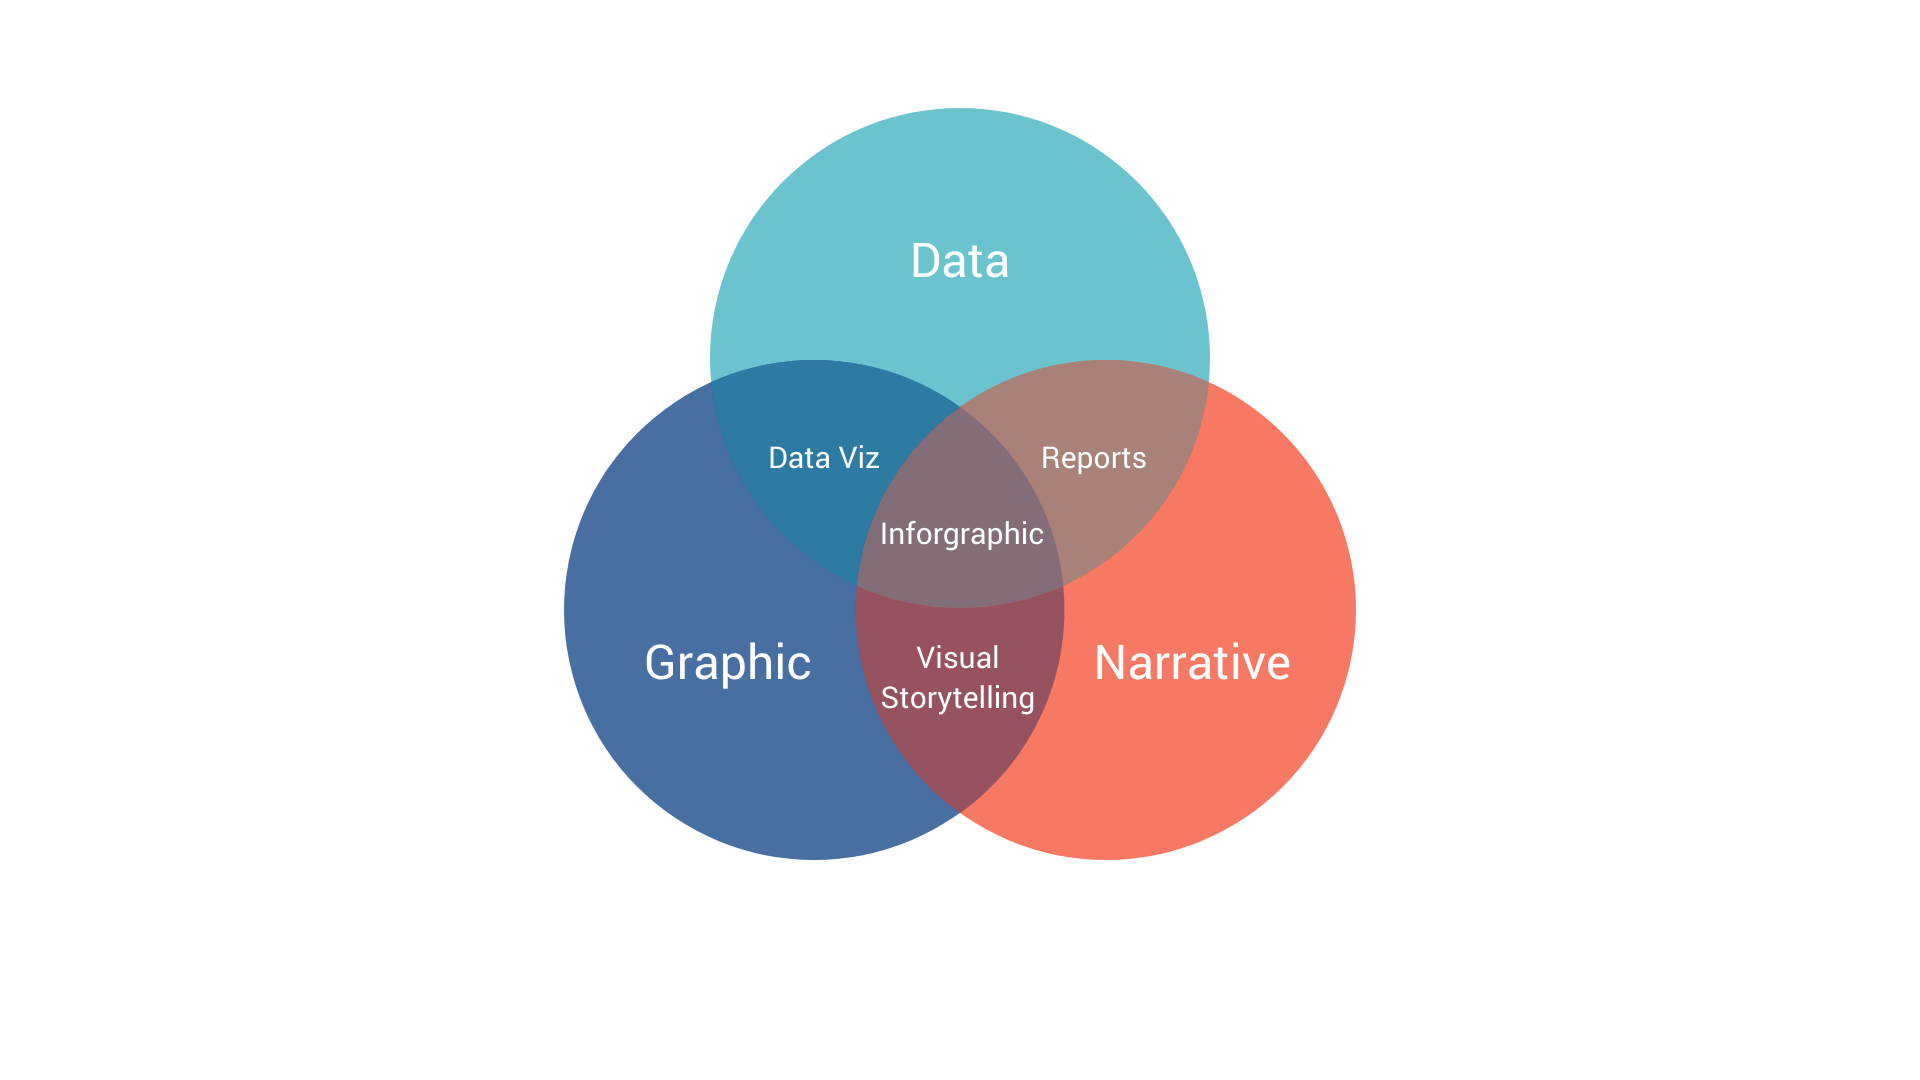 Design space of different narrative structures to create better visualizations